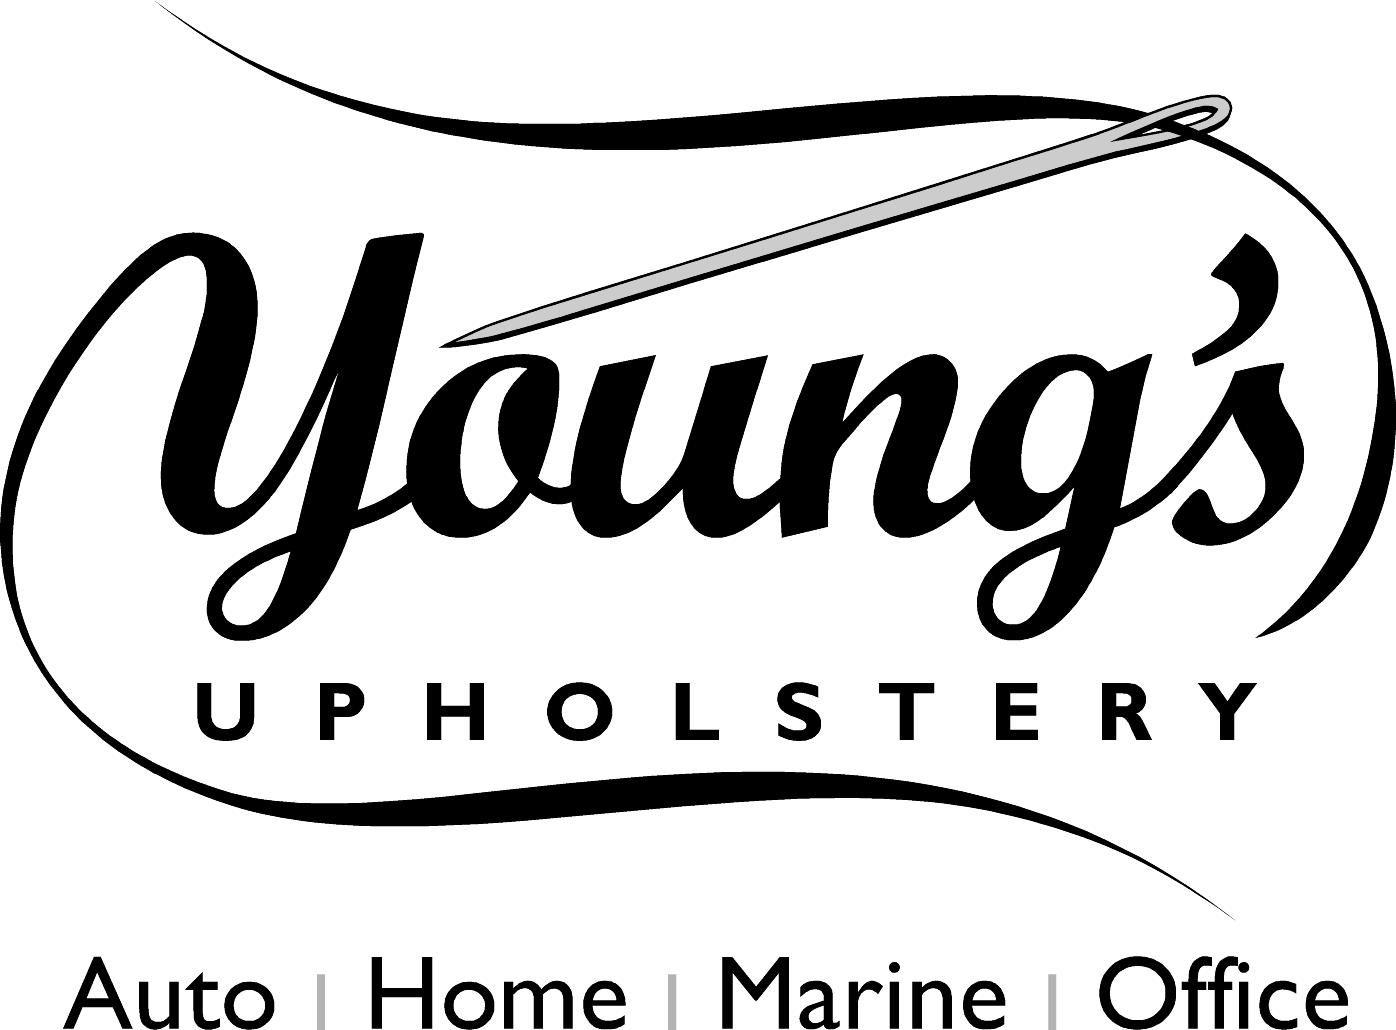 Upholstery Logo - About Young's Upholstery | Young's Upholstery